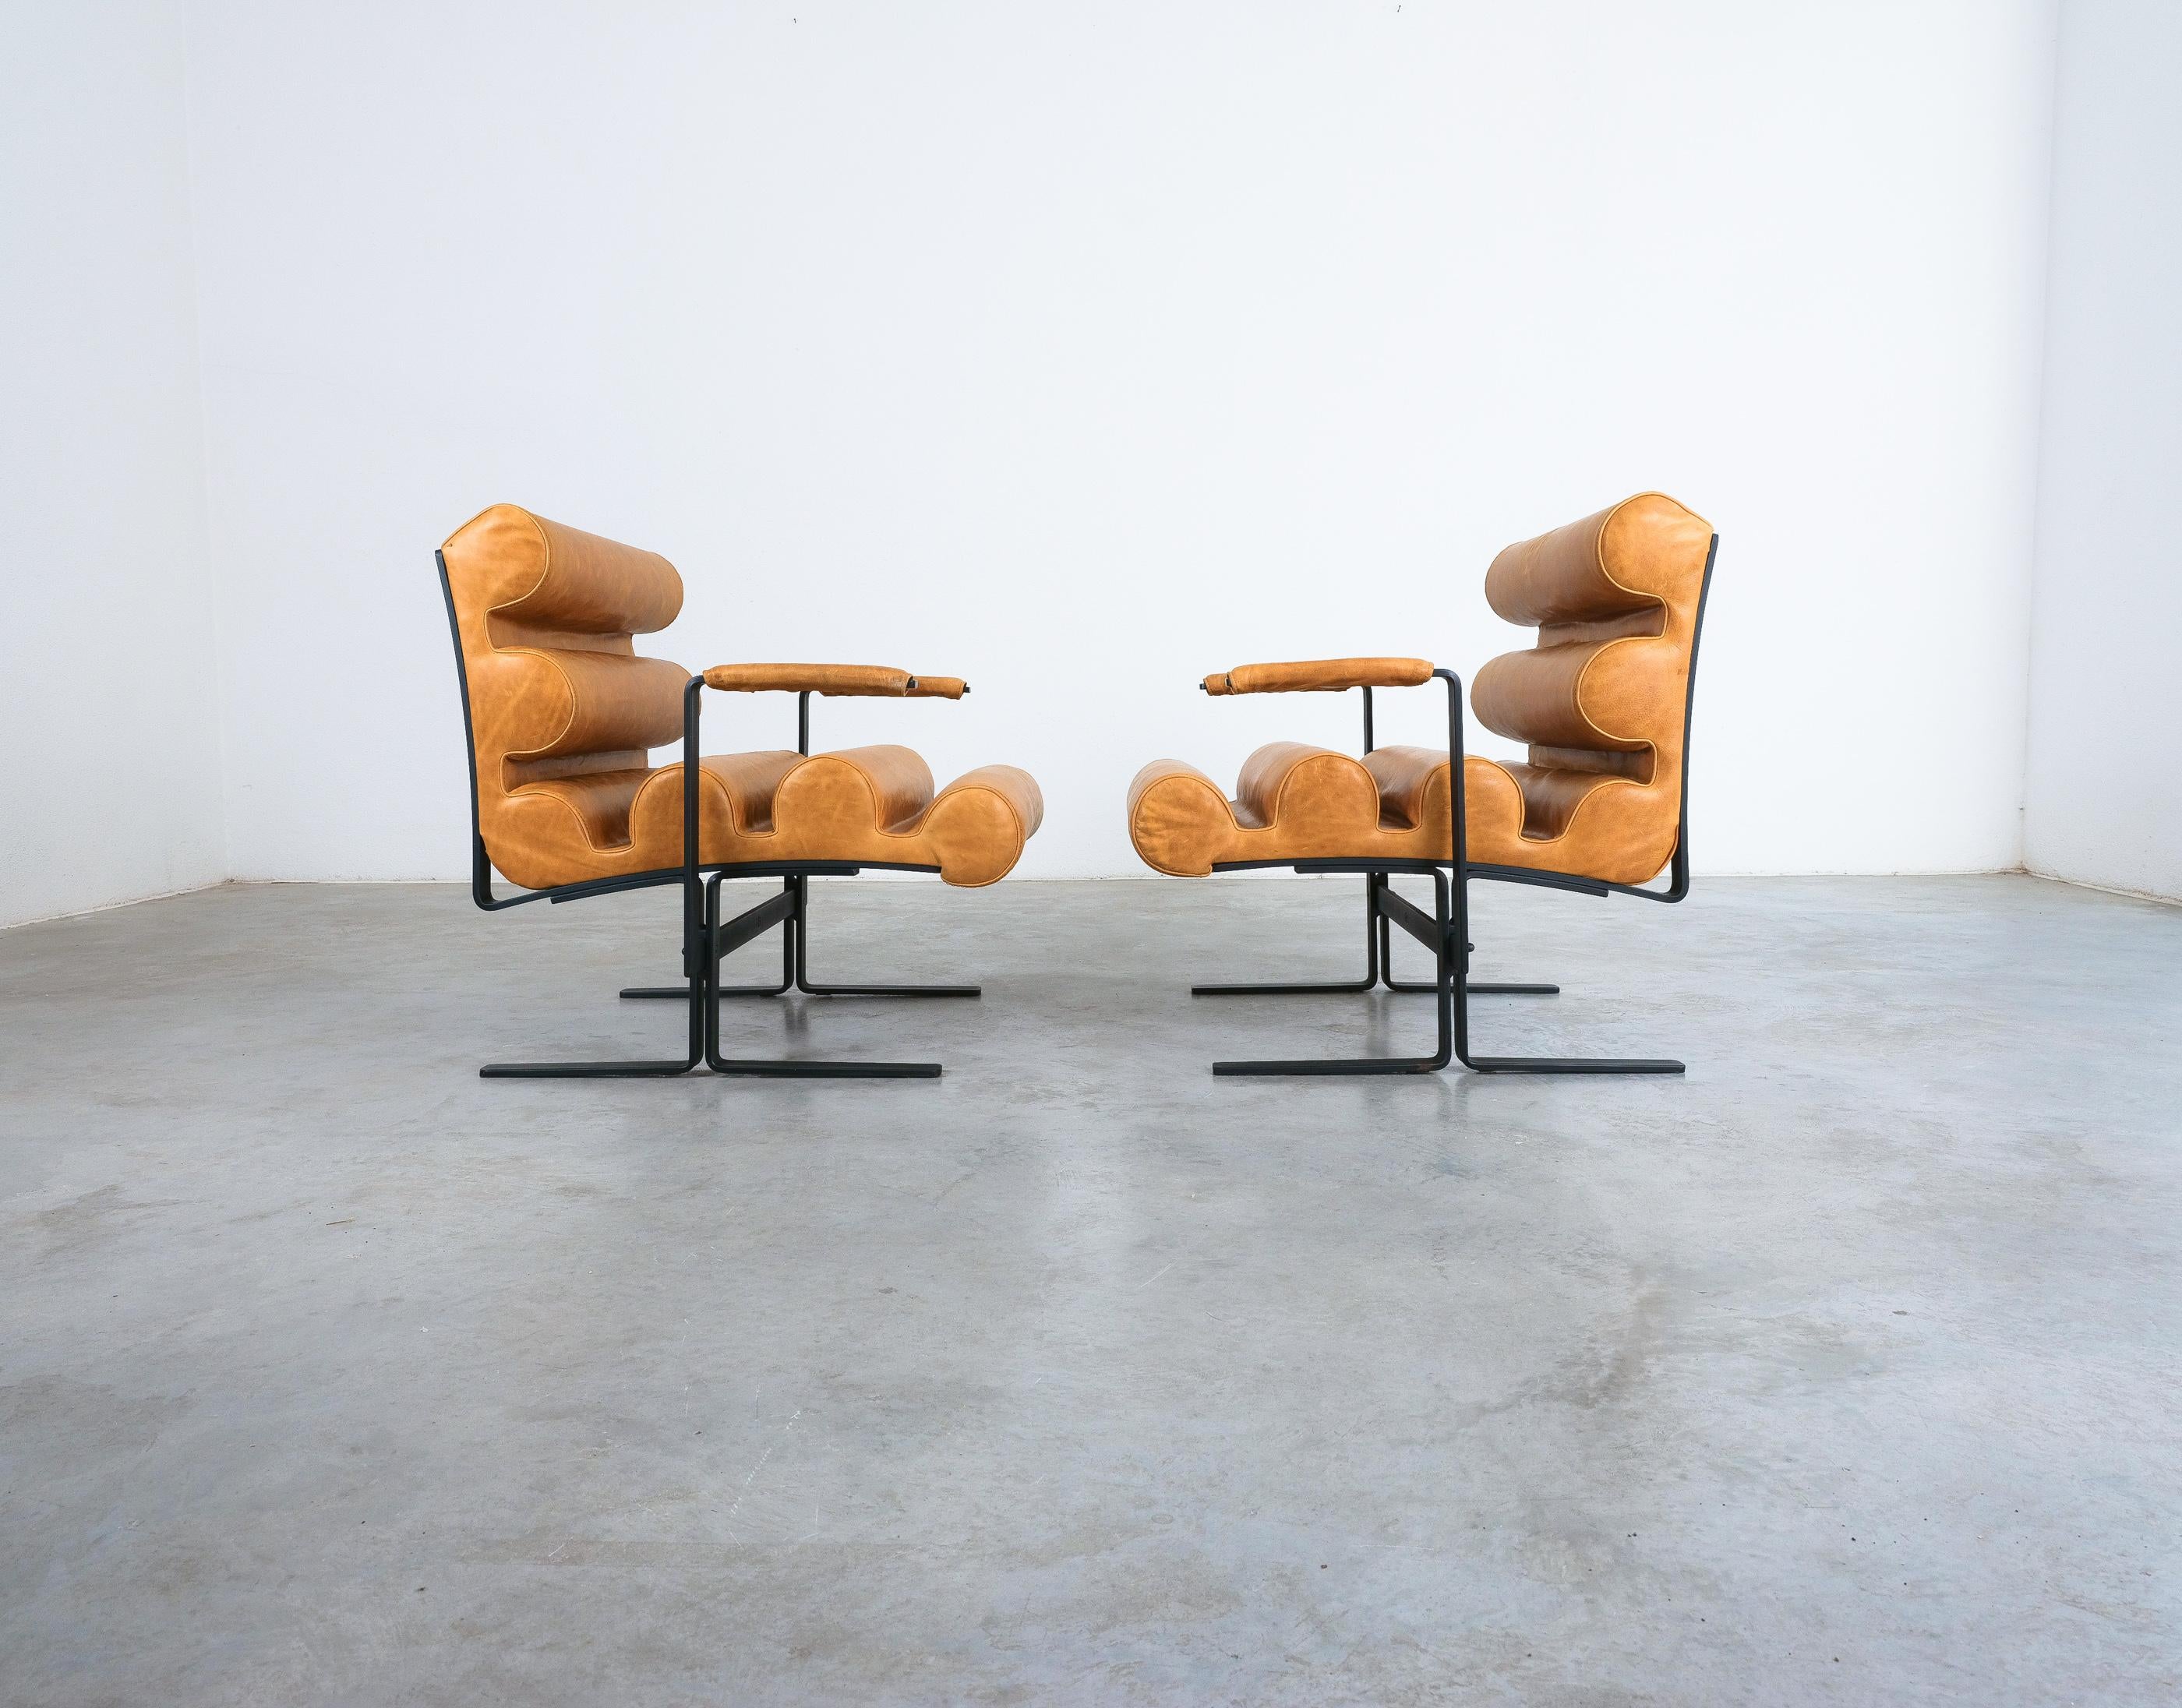 Mid-Century Modern Joe Colombo For Sormani Roll Brown Leather Spring Steel Armchair Pair (2) , 1962 For Sale